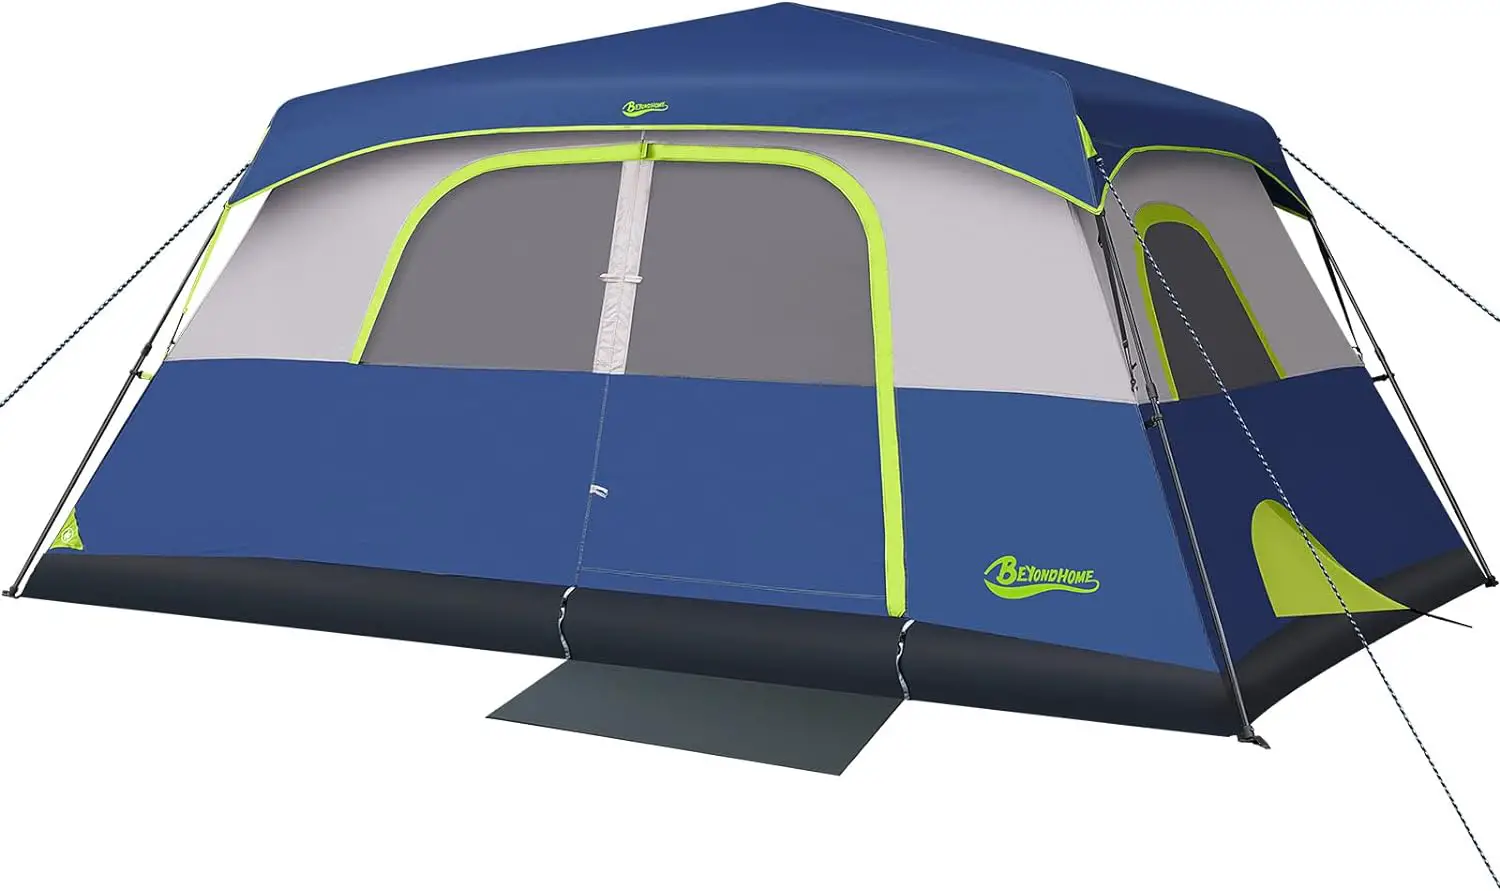 BEYONDHOME Instant Cabin Tent Review